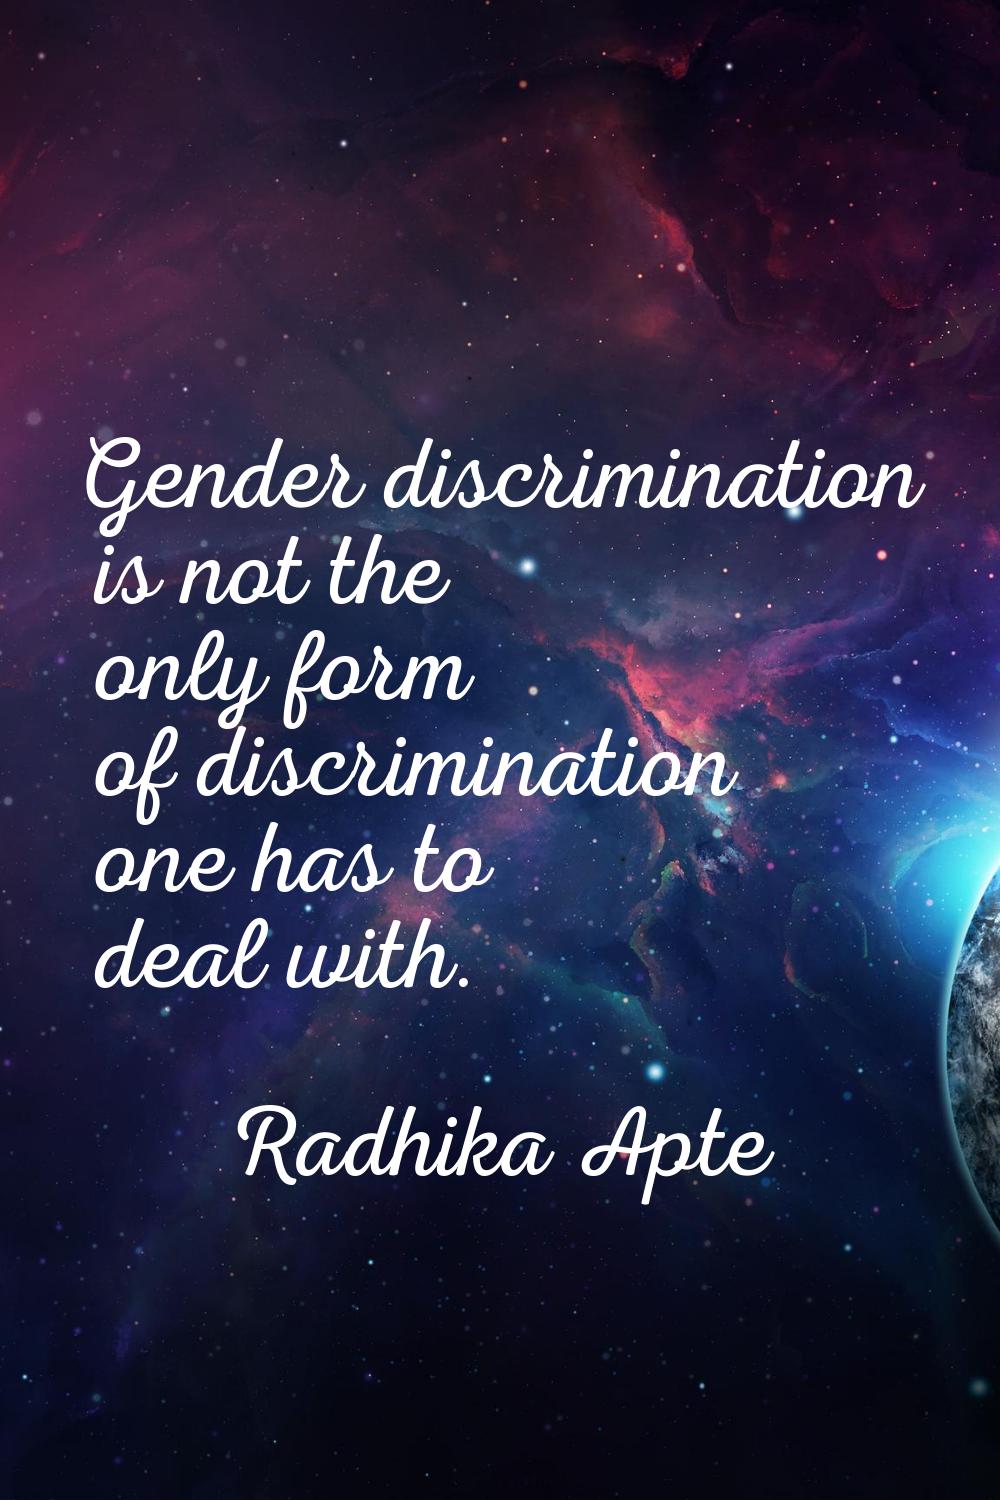 Gender discrimination is not the only form of discrimination one has to deal with.